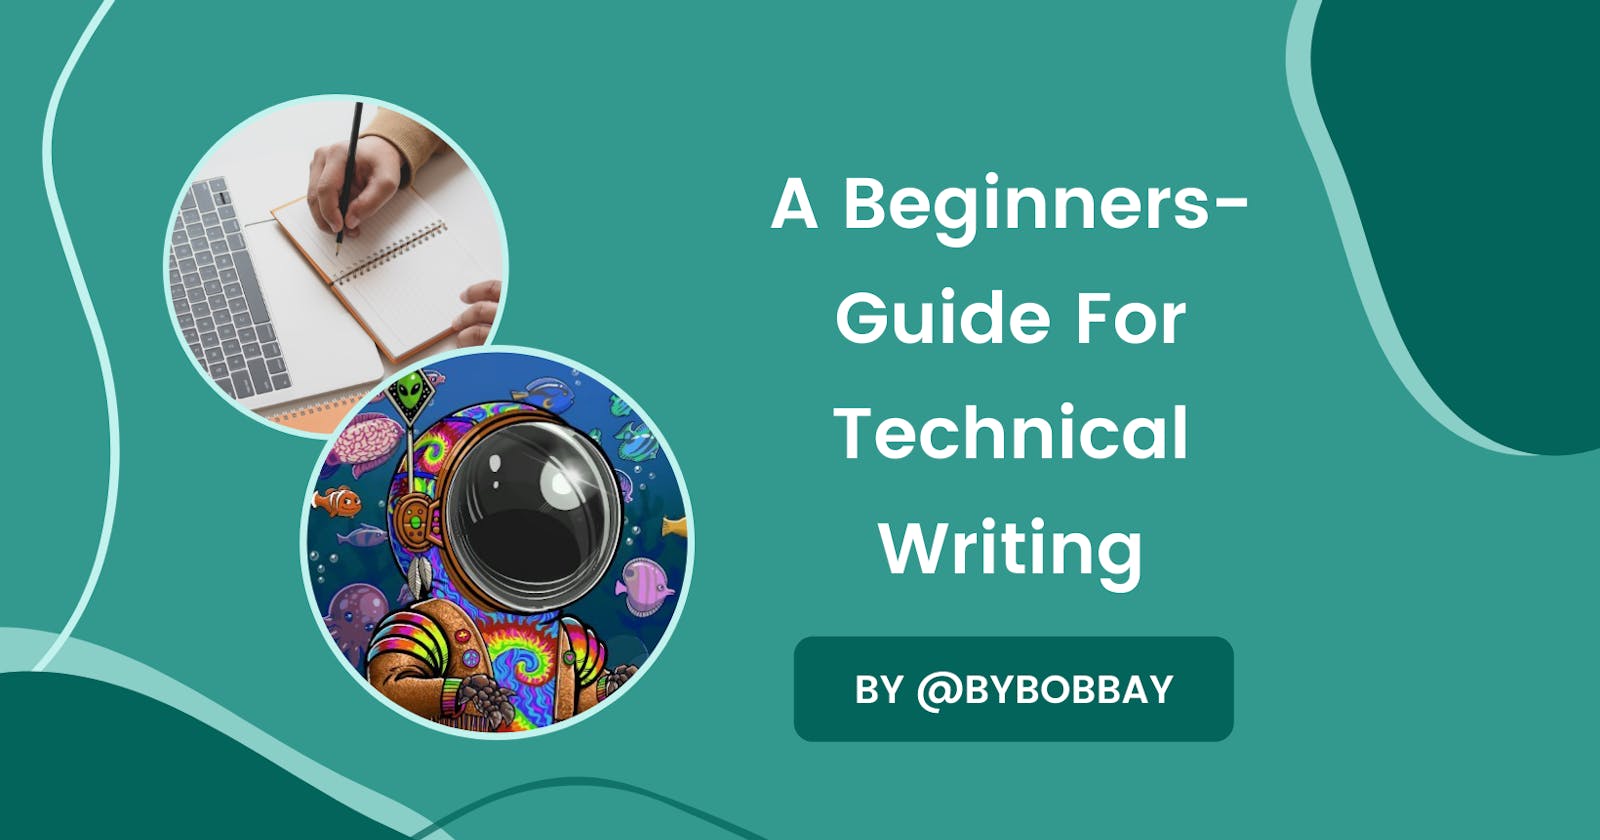 A Beginners-Guide For Technical Writing (Roadmap)